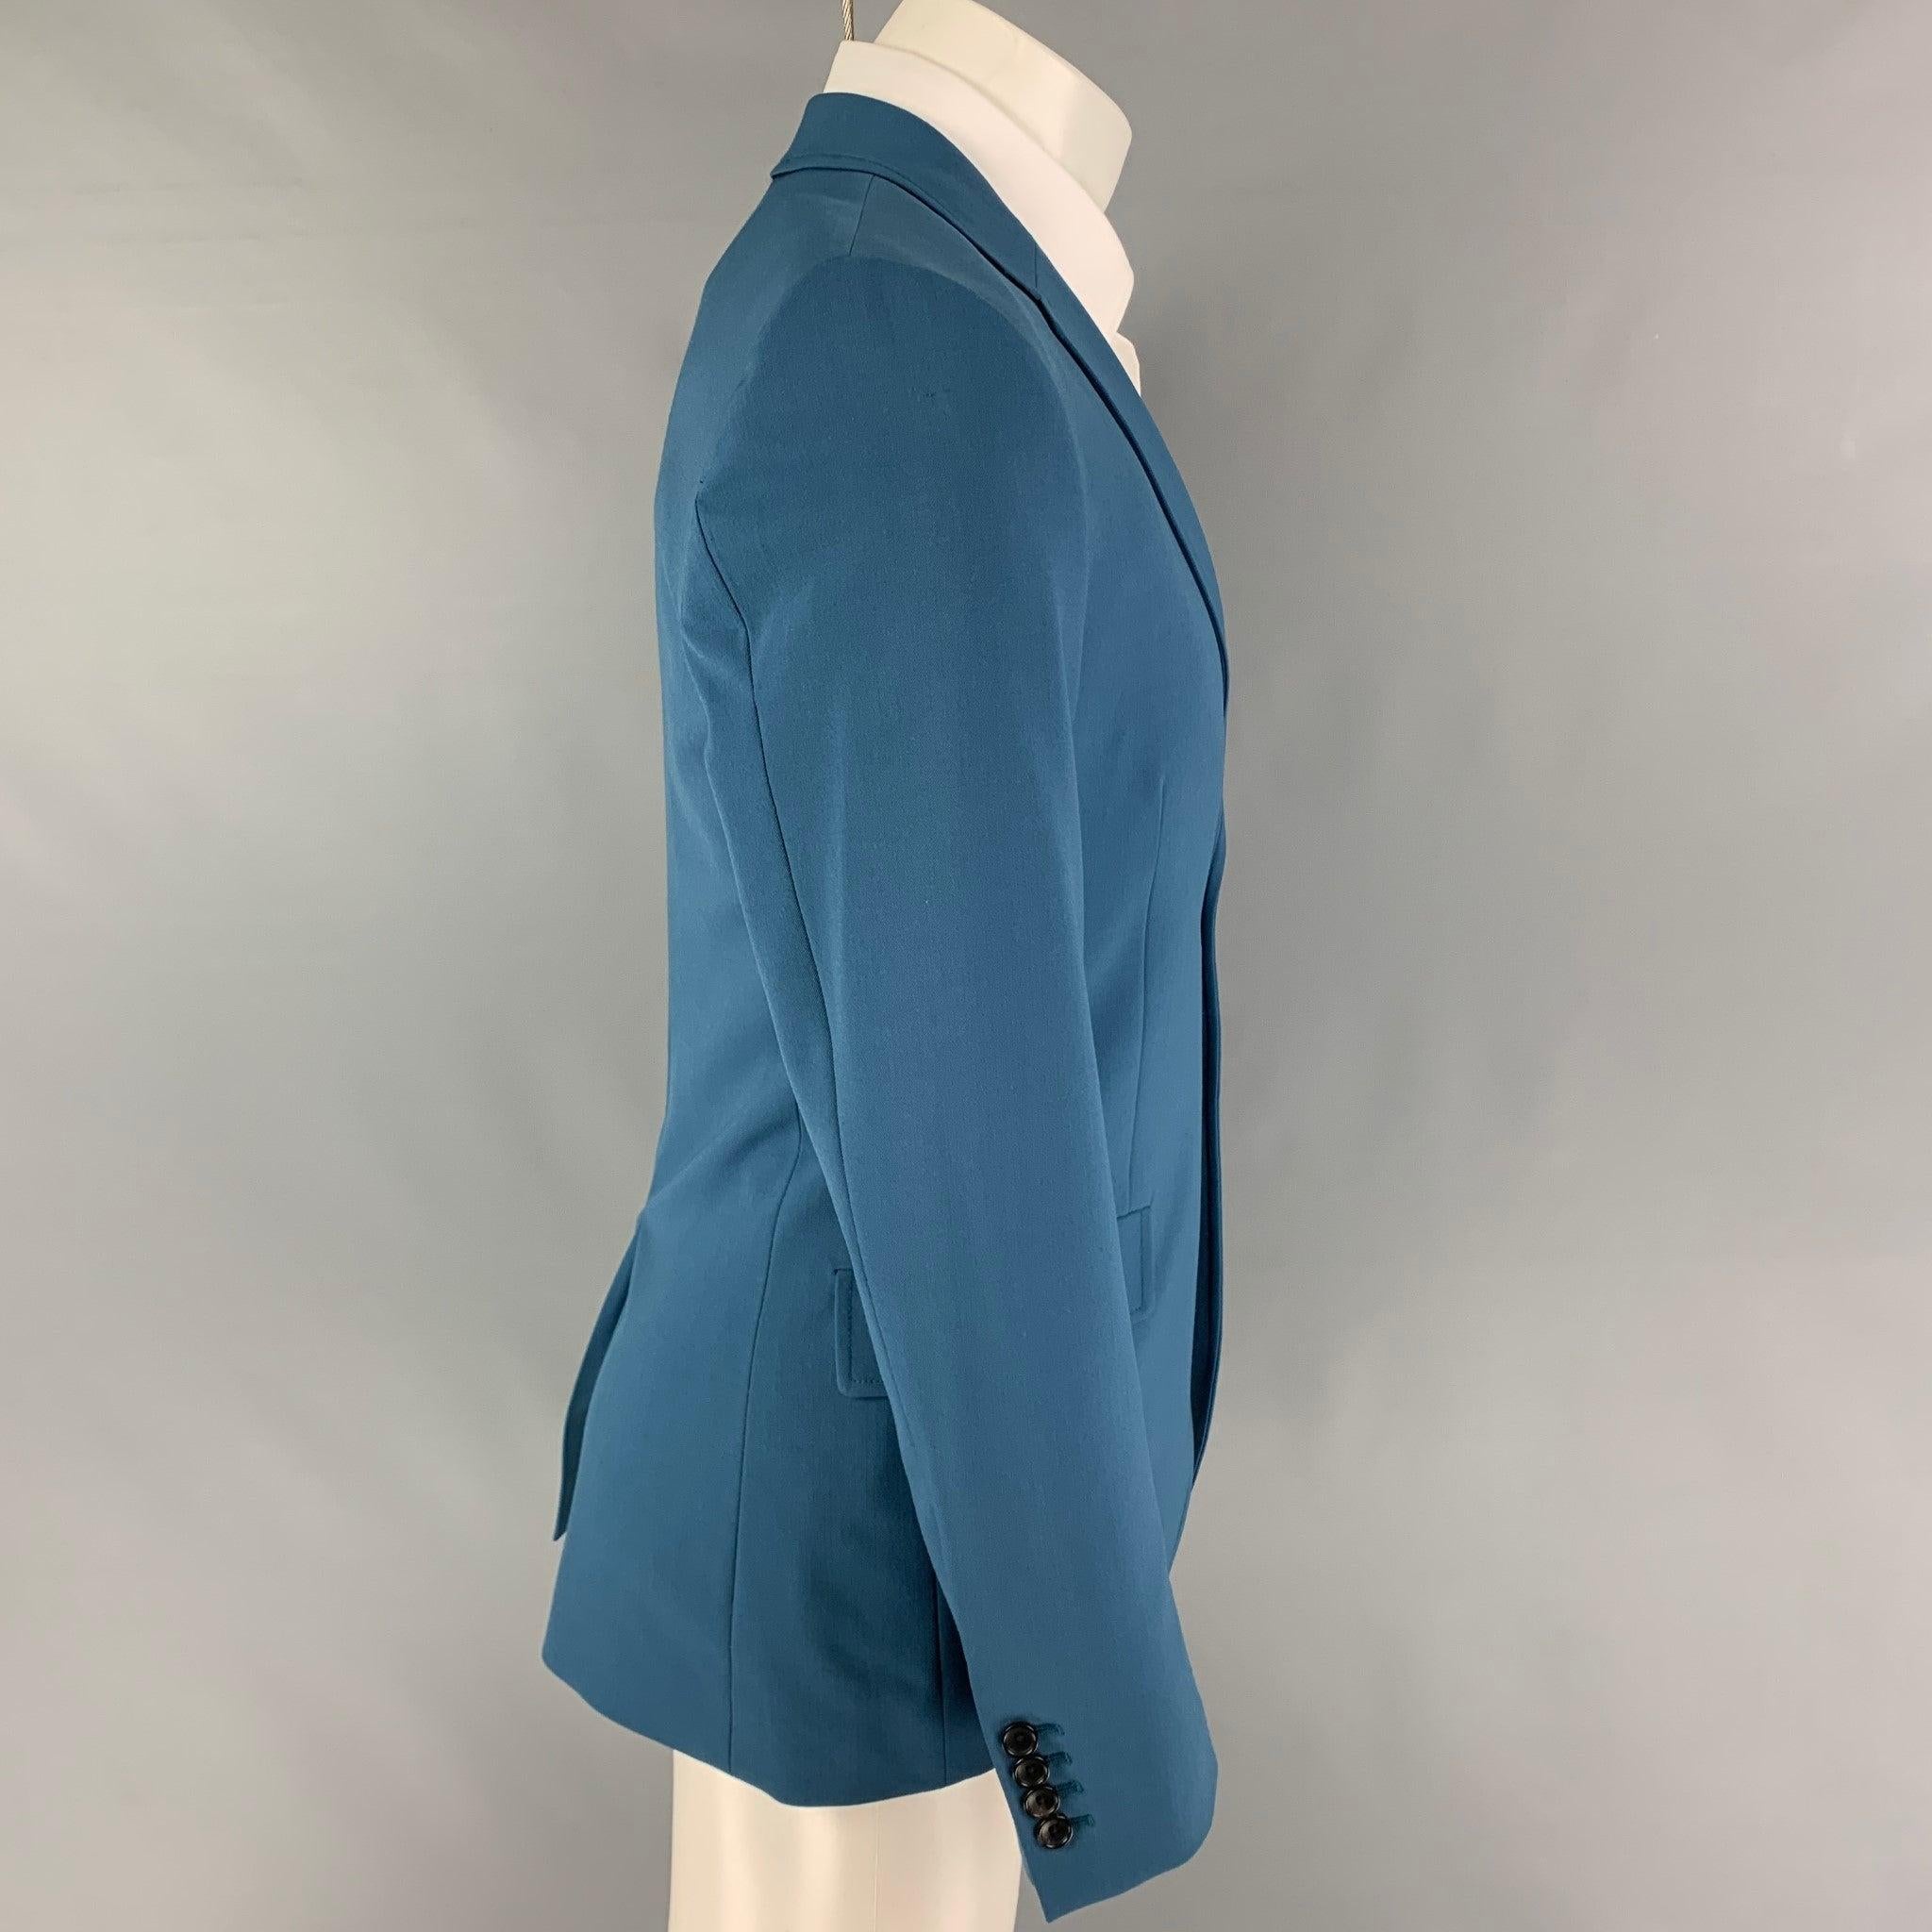 JOSEPH sport coat comes in a teal polyester blend with a full liner featuring a notch lapel, flap pockets, single back vent, and a double button closure. Made in Romania. Very Good
Pre-Owned Condition. 

Marked:   48 

Measurements: 
 
Shoulder:
18